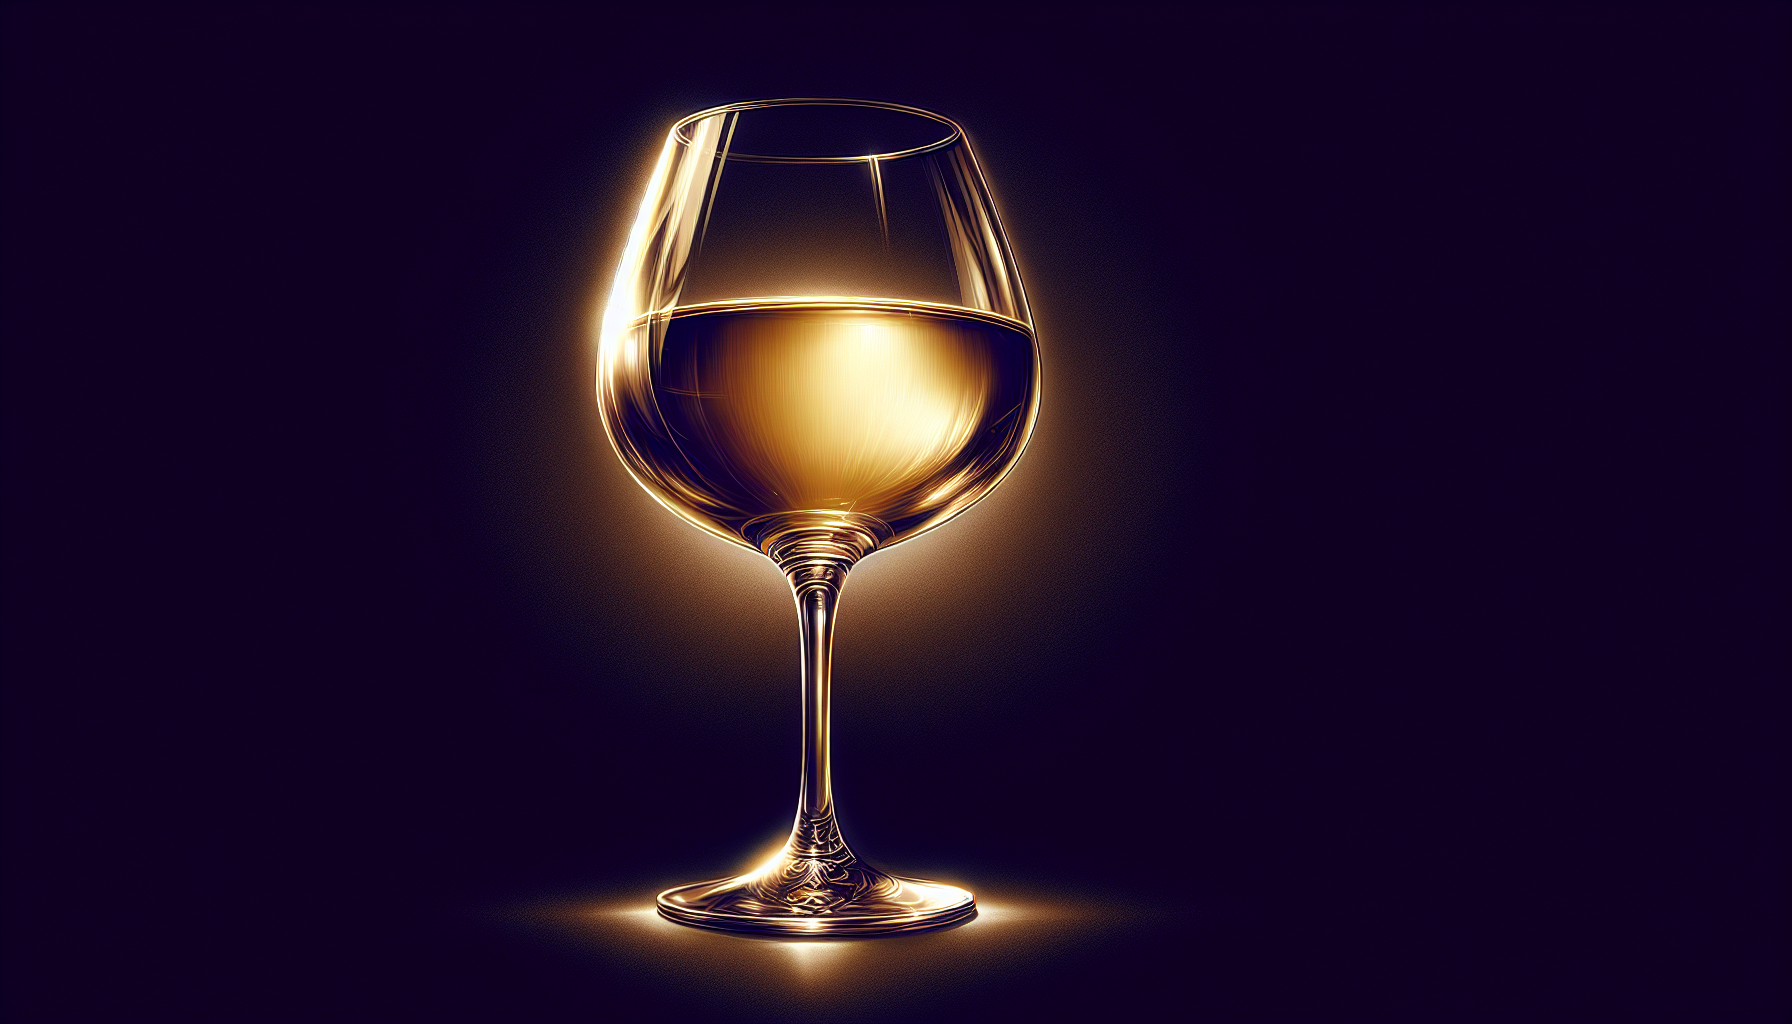 Illustration of a wine glass with a rich, creamy texture and buttery flavors